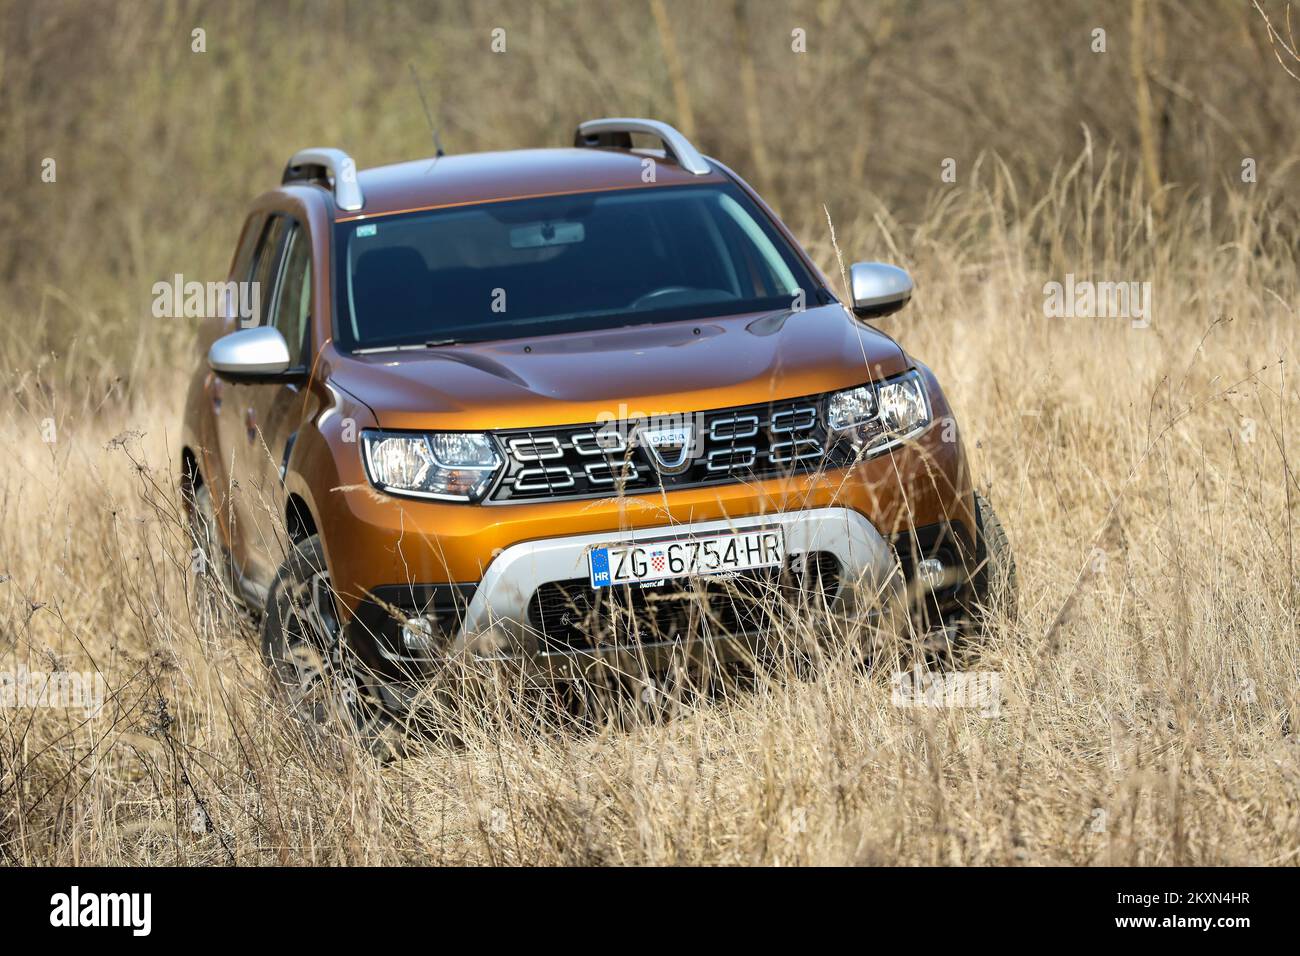 MOSCOW, RUSSIA - MAY 08, 2021 Renault Duster second generation. Compact SUV  car also called Dacia Duster. Exterior front side close up view on nature  Stock Photo - Alamy